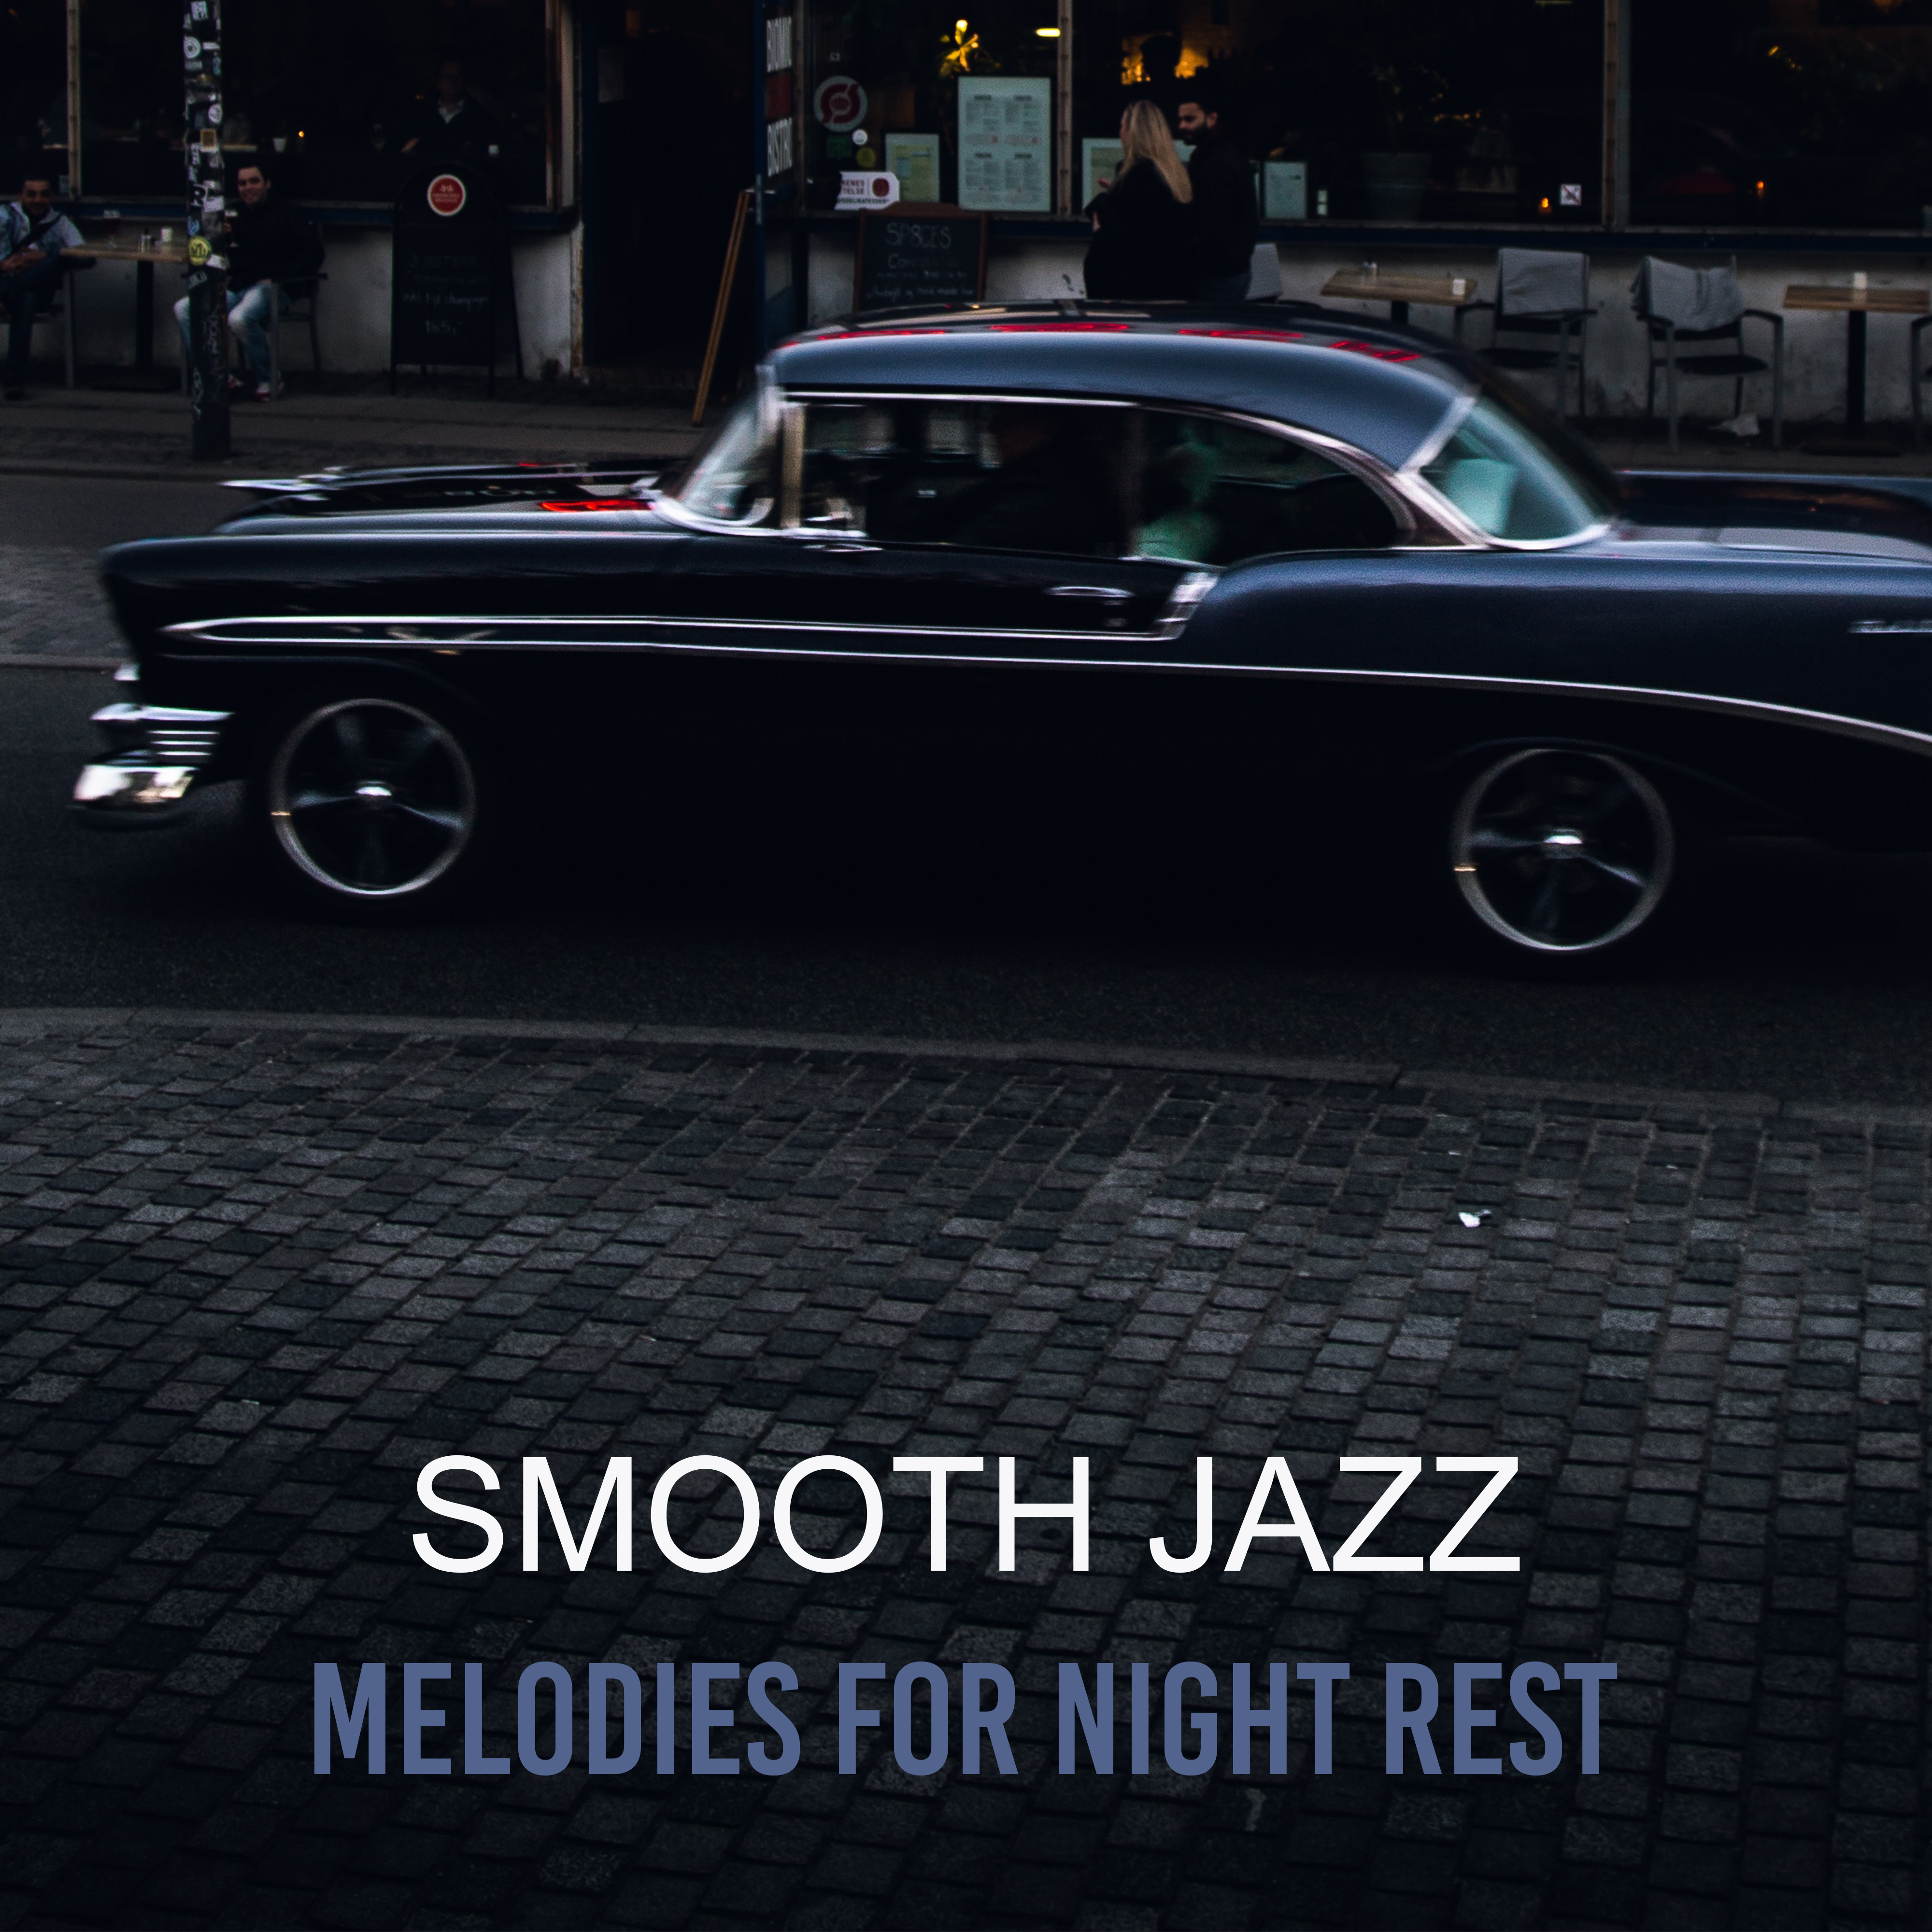 Smooth Jazz Melodies for Night Rest